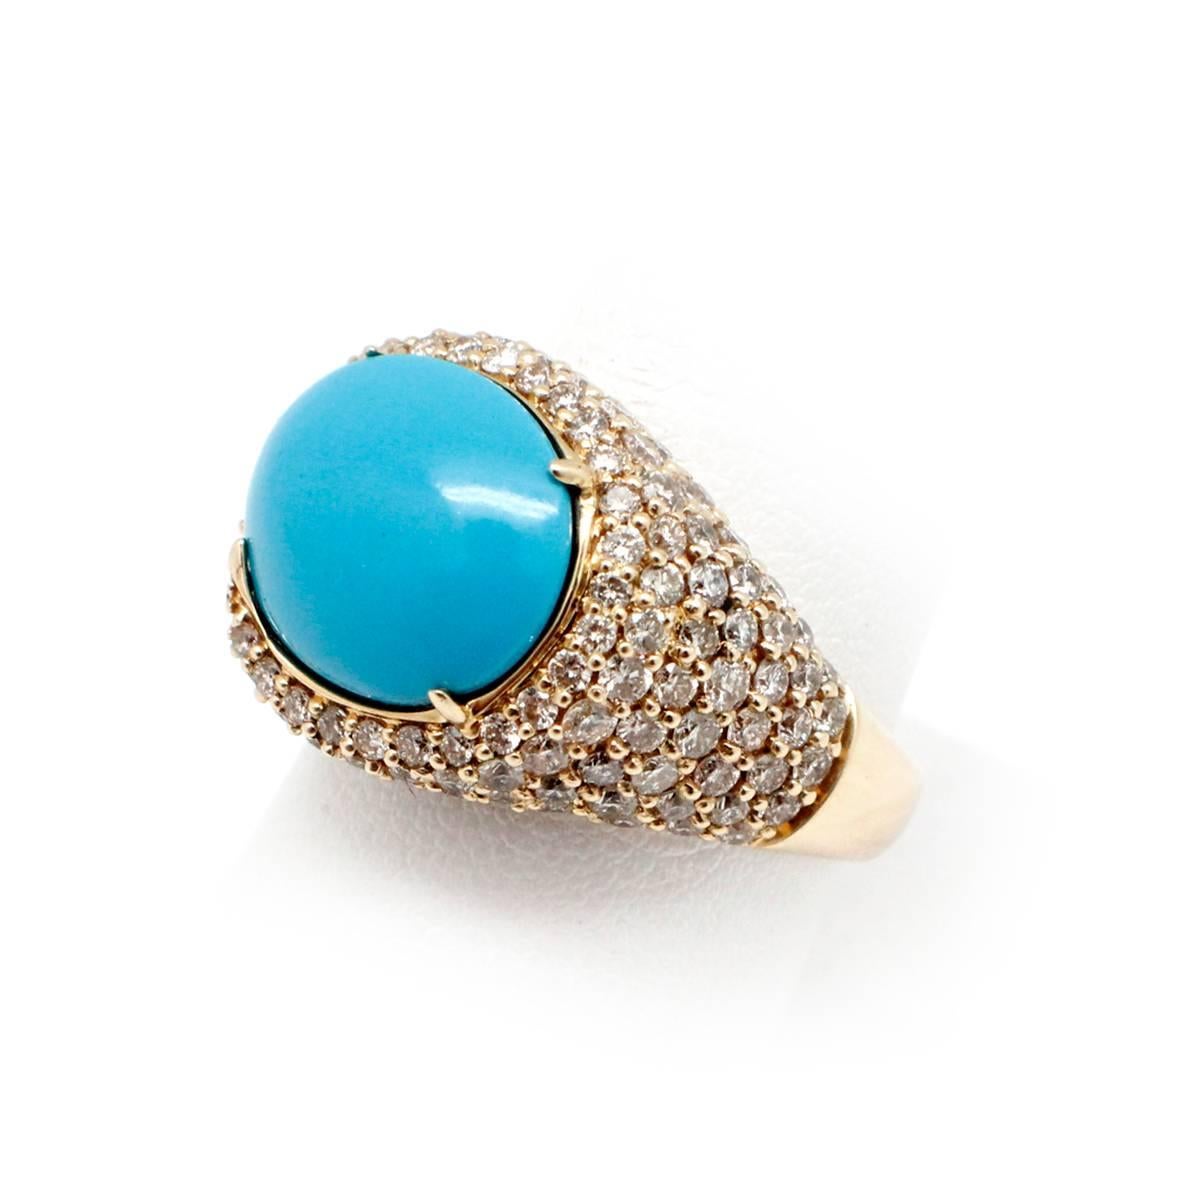 This ring is made in 14k yellow gold. It features a turquoise stone at its center. Accenting the turquoise are 150 round brilliant, pave-set diamonds. The diamonds have a total weight of 2.25ct. The ring measures 16mm at its widest point and weighs